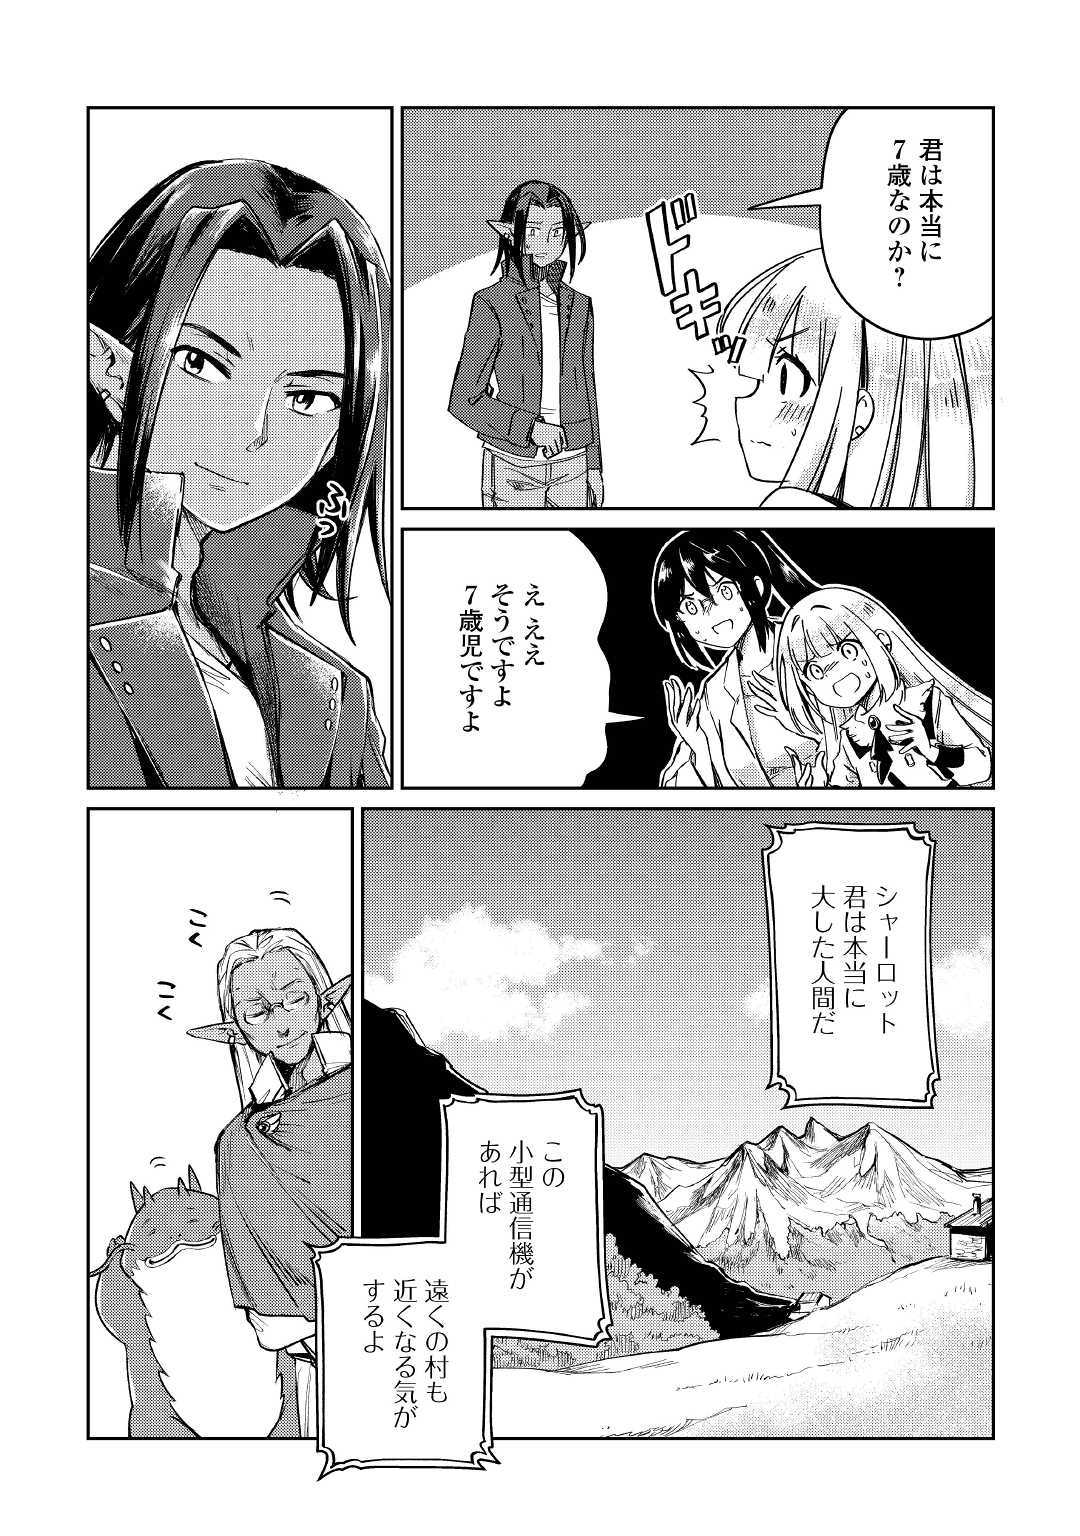 The Former Structural Researcher’s Story of Otherworldly Adventure 第21話 - Page 4